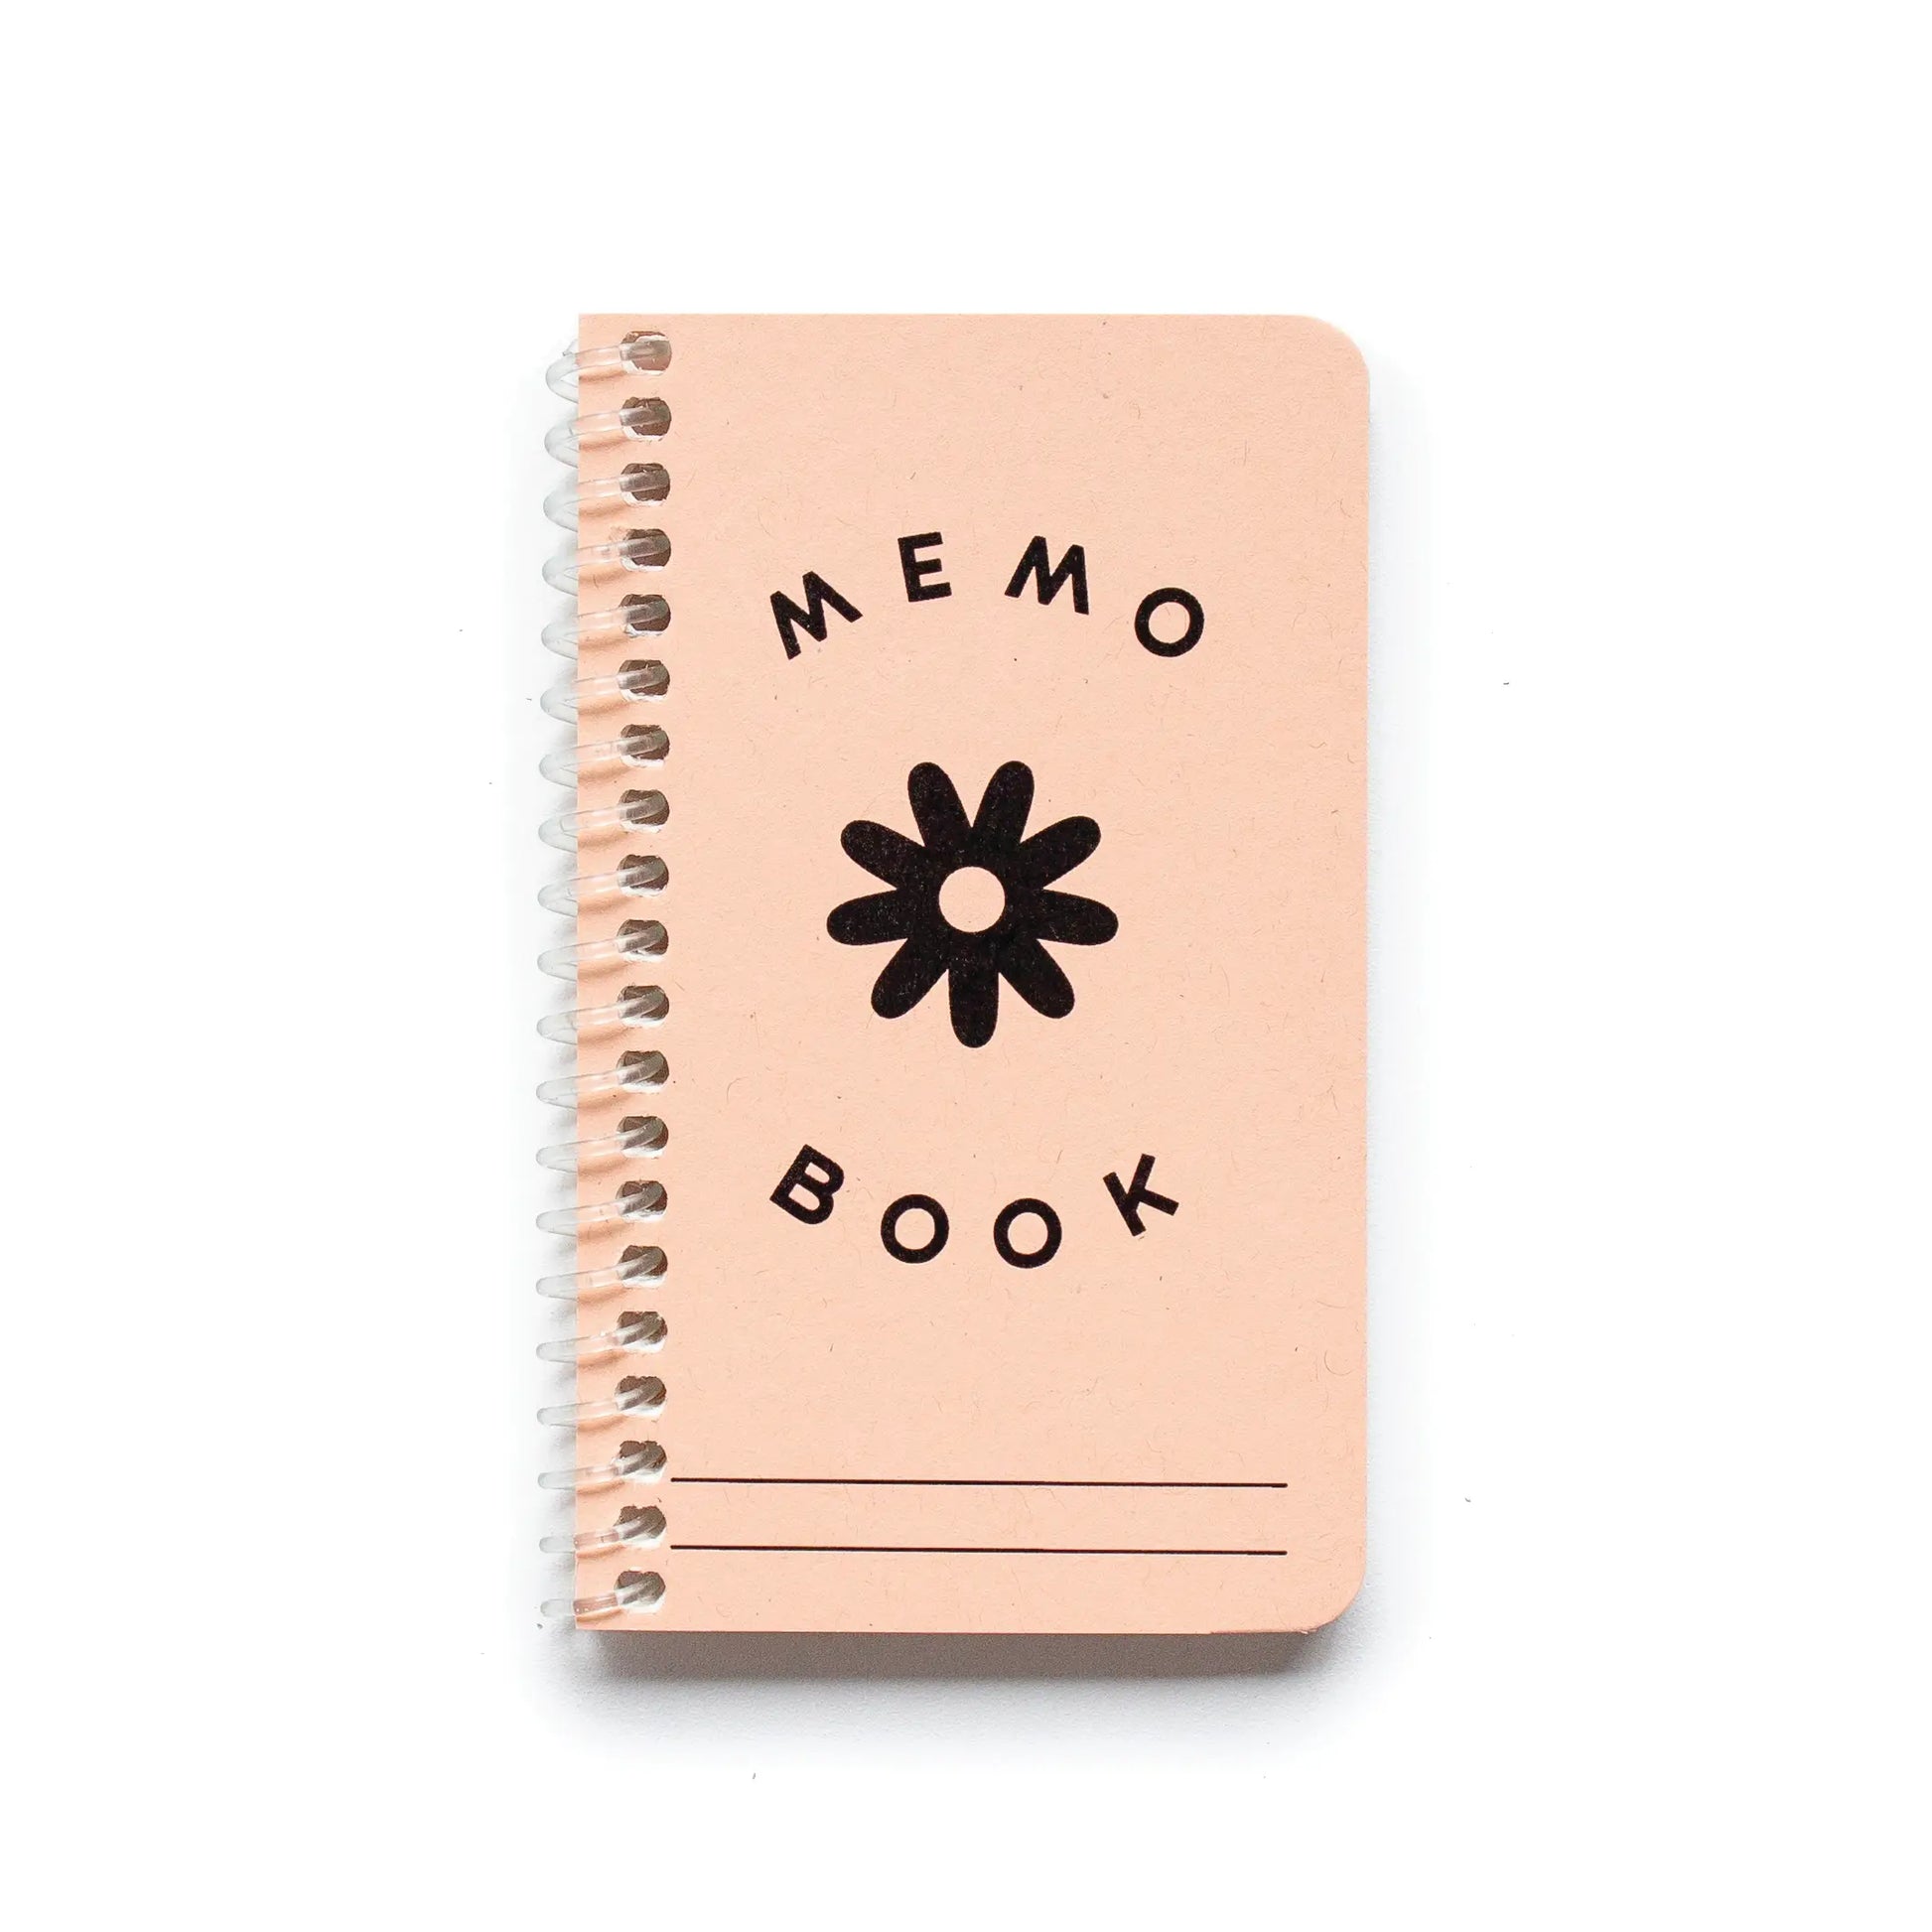 Memo Books by Worthwhile Paper - Flower by K. A. Artist Shop - K. A. Artist Shop